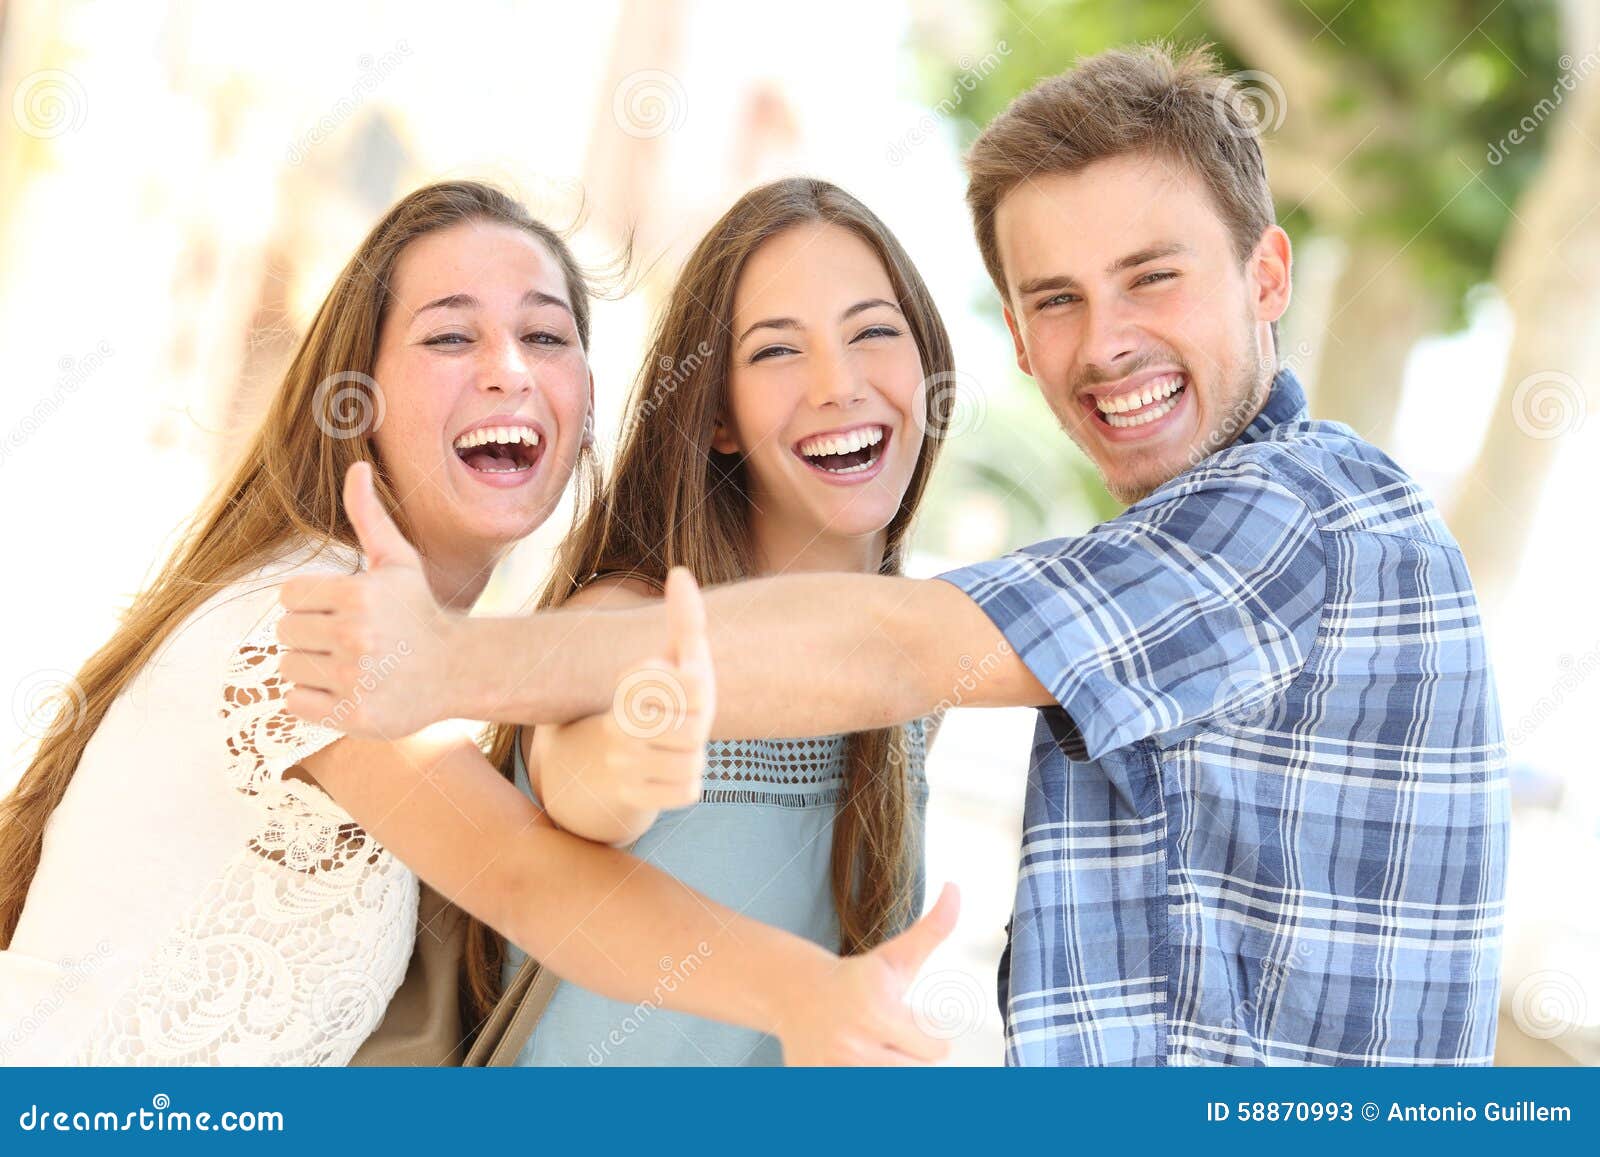 three happy teenagers laughing with thumbs up